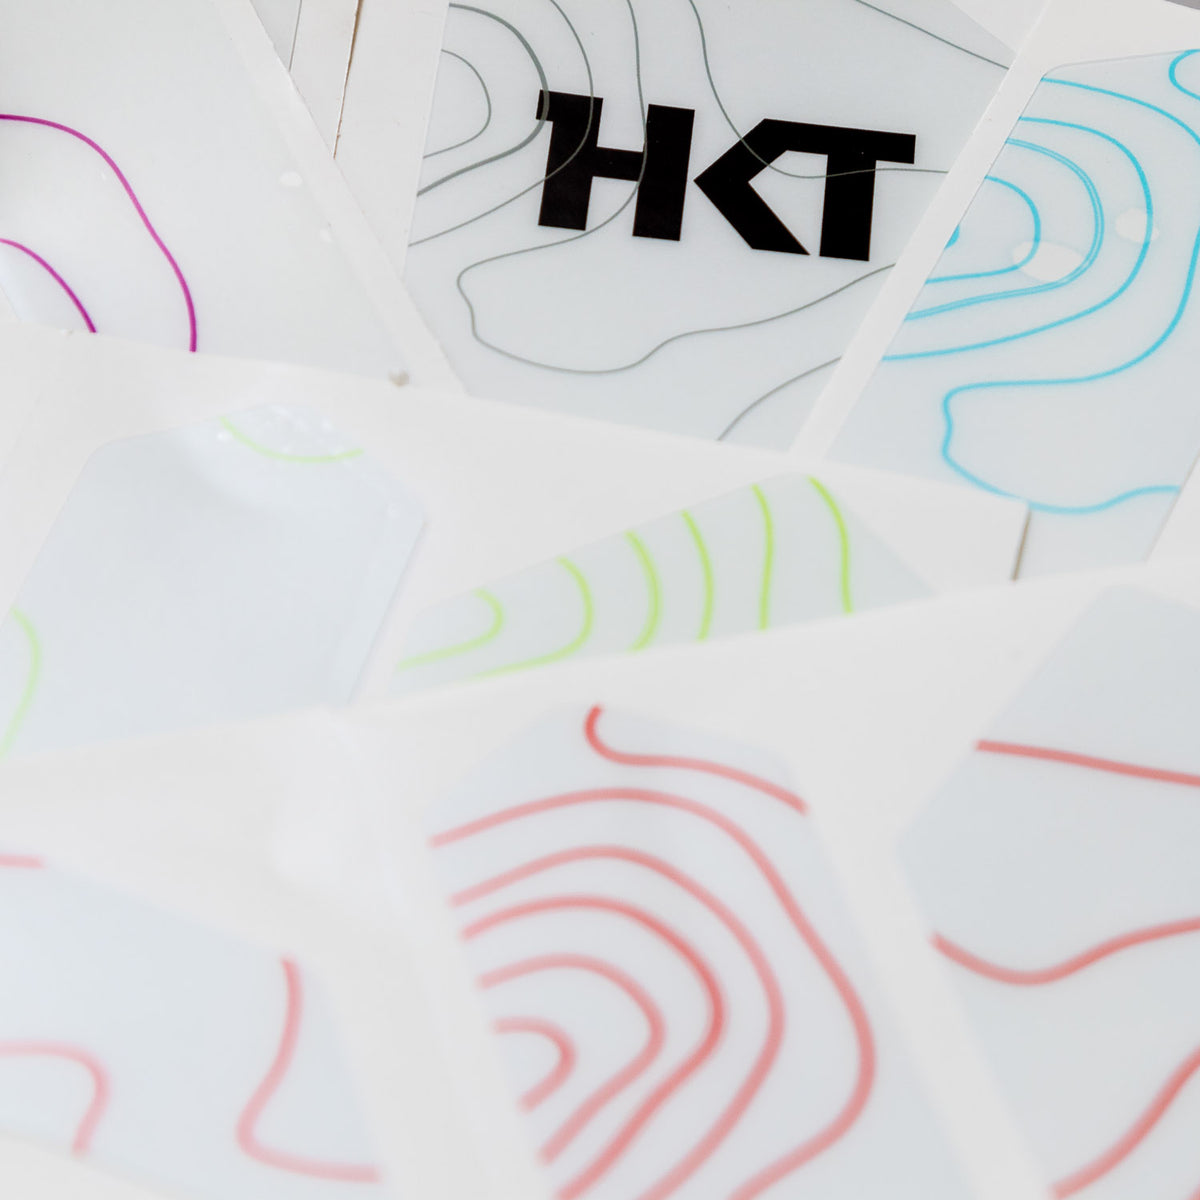 Frame Protection Kit [XL] - By HKT Protect // Contour